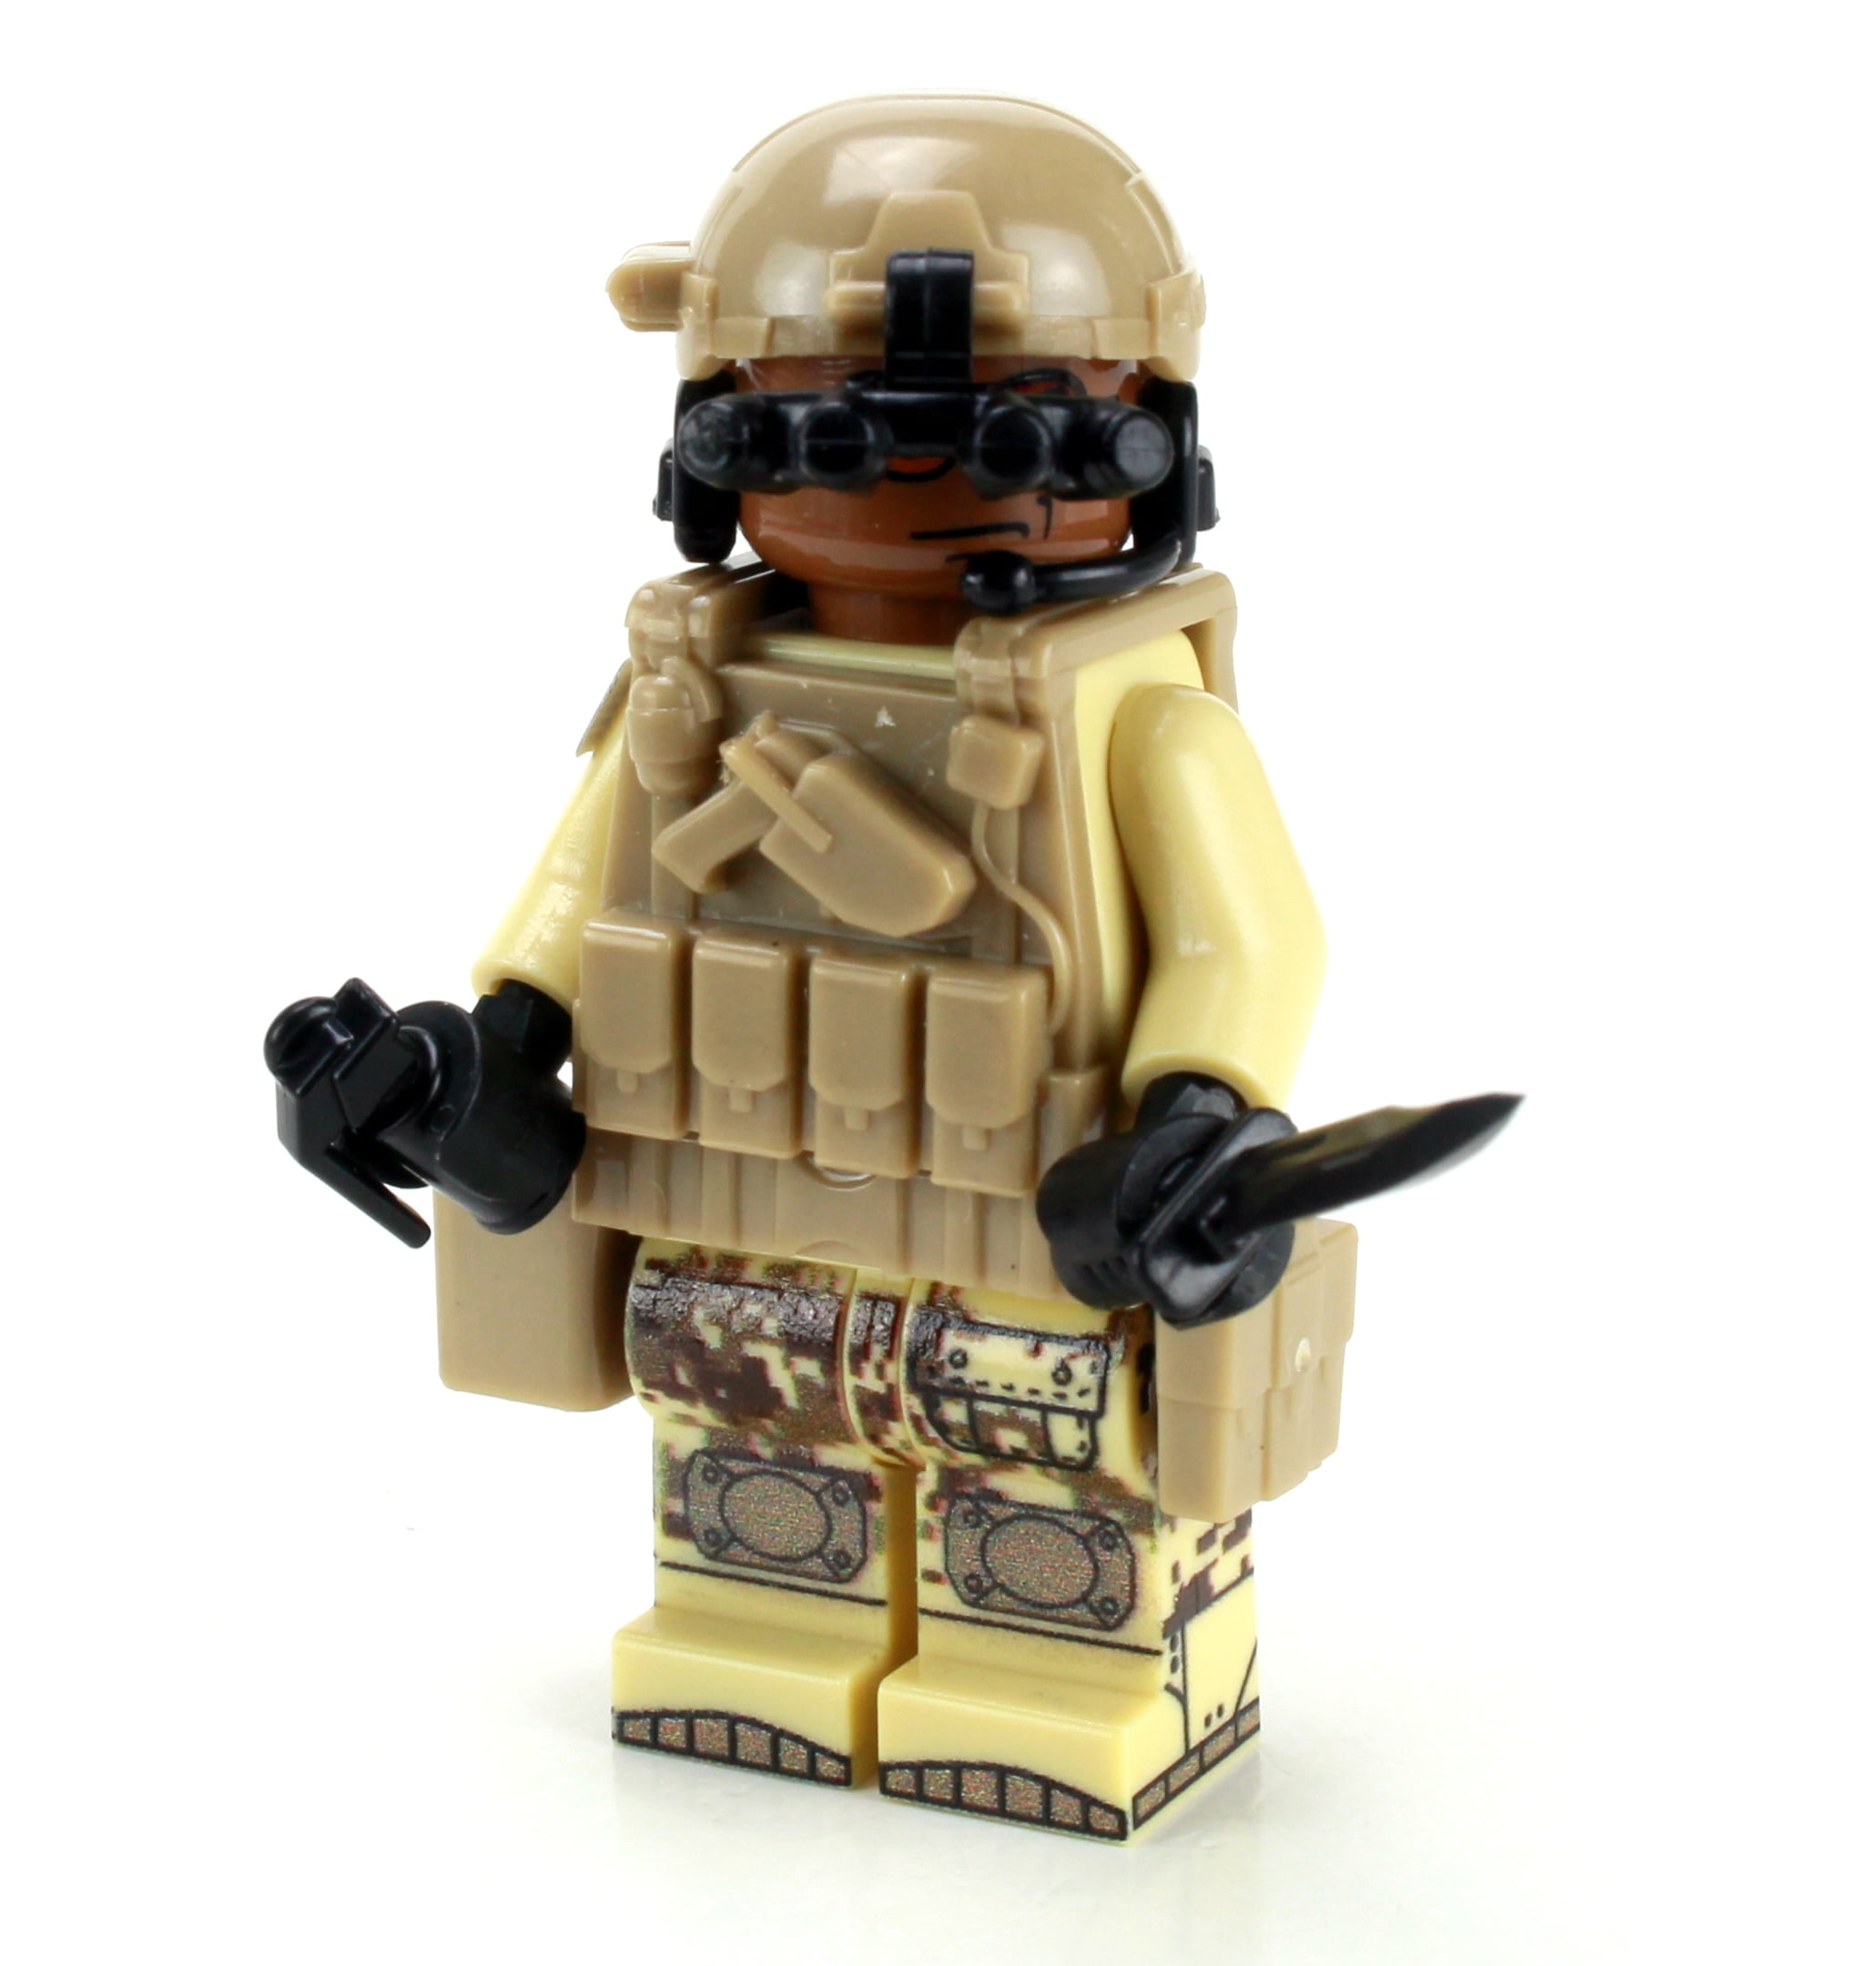 Custom soldier mini figure with black panels in lego and custom parts